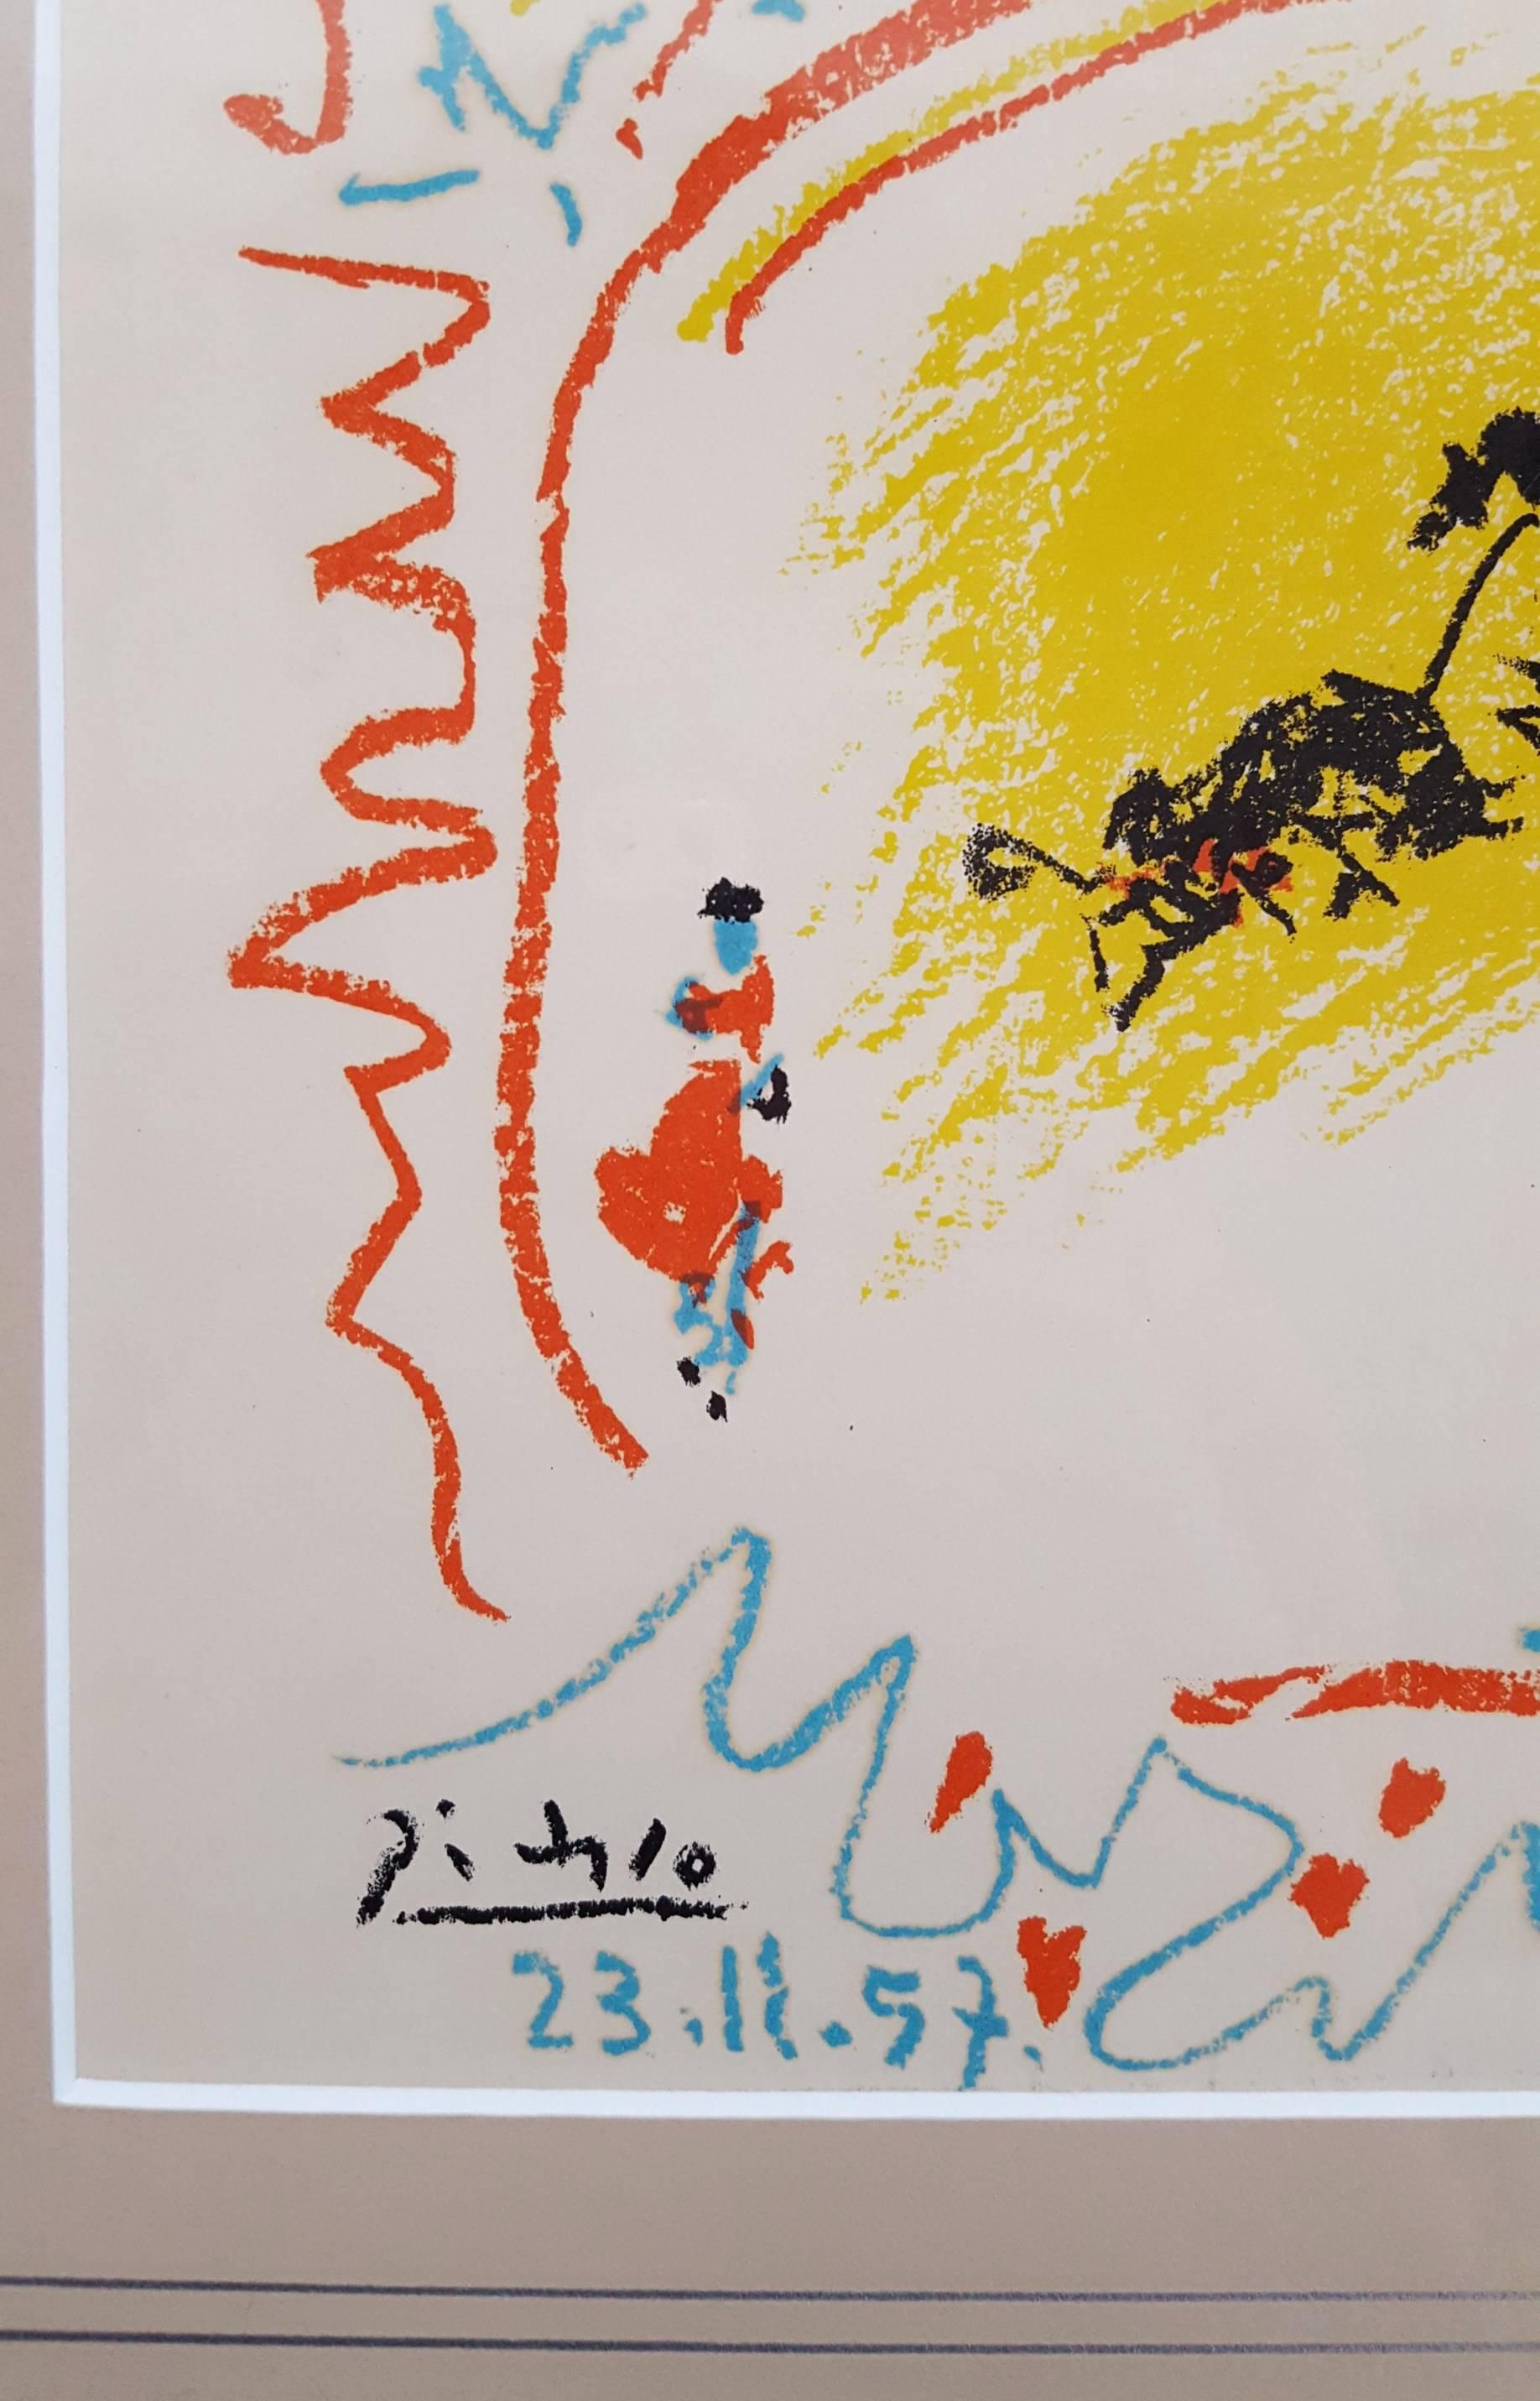 An original lithograph on wove paper by Spanish artist Pablo Picasso (1881-1973) titled "La Petite Corrida", 1971. Unsigned as issued. Comes from the XXe Siecle No. 10 Portfolio. (Second edition). Printed by Mourlot in 1971, Paris, France.